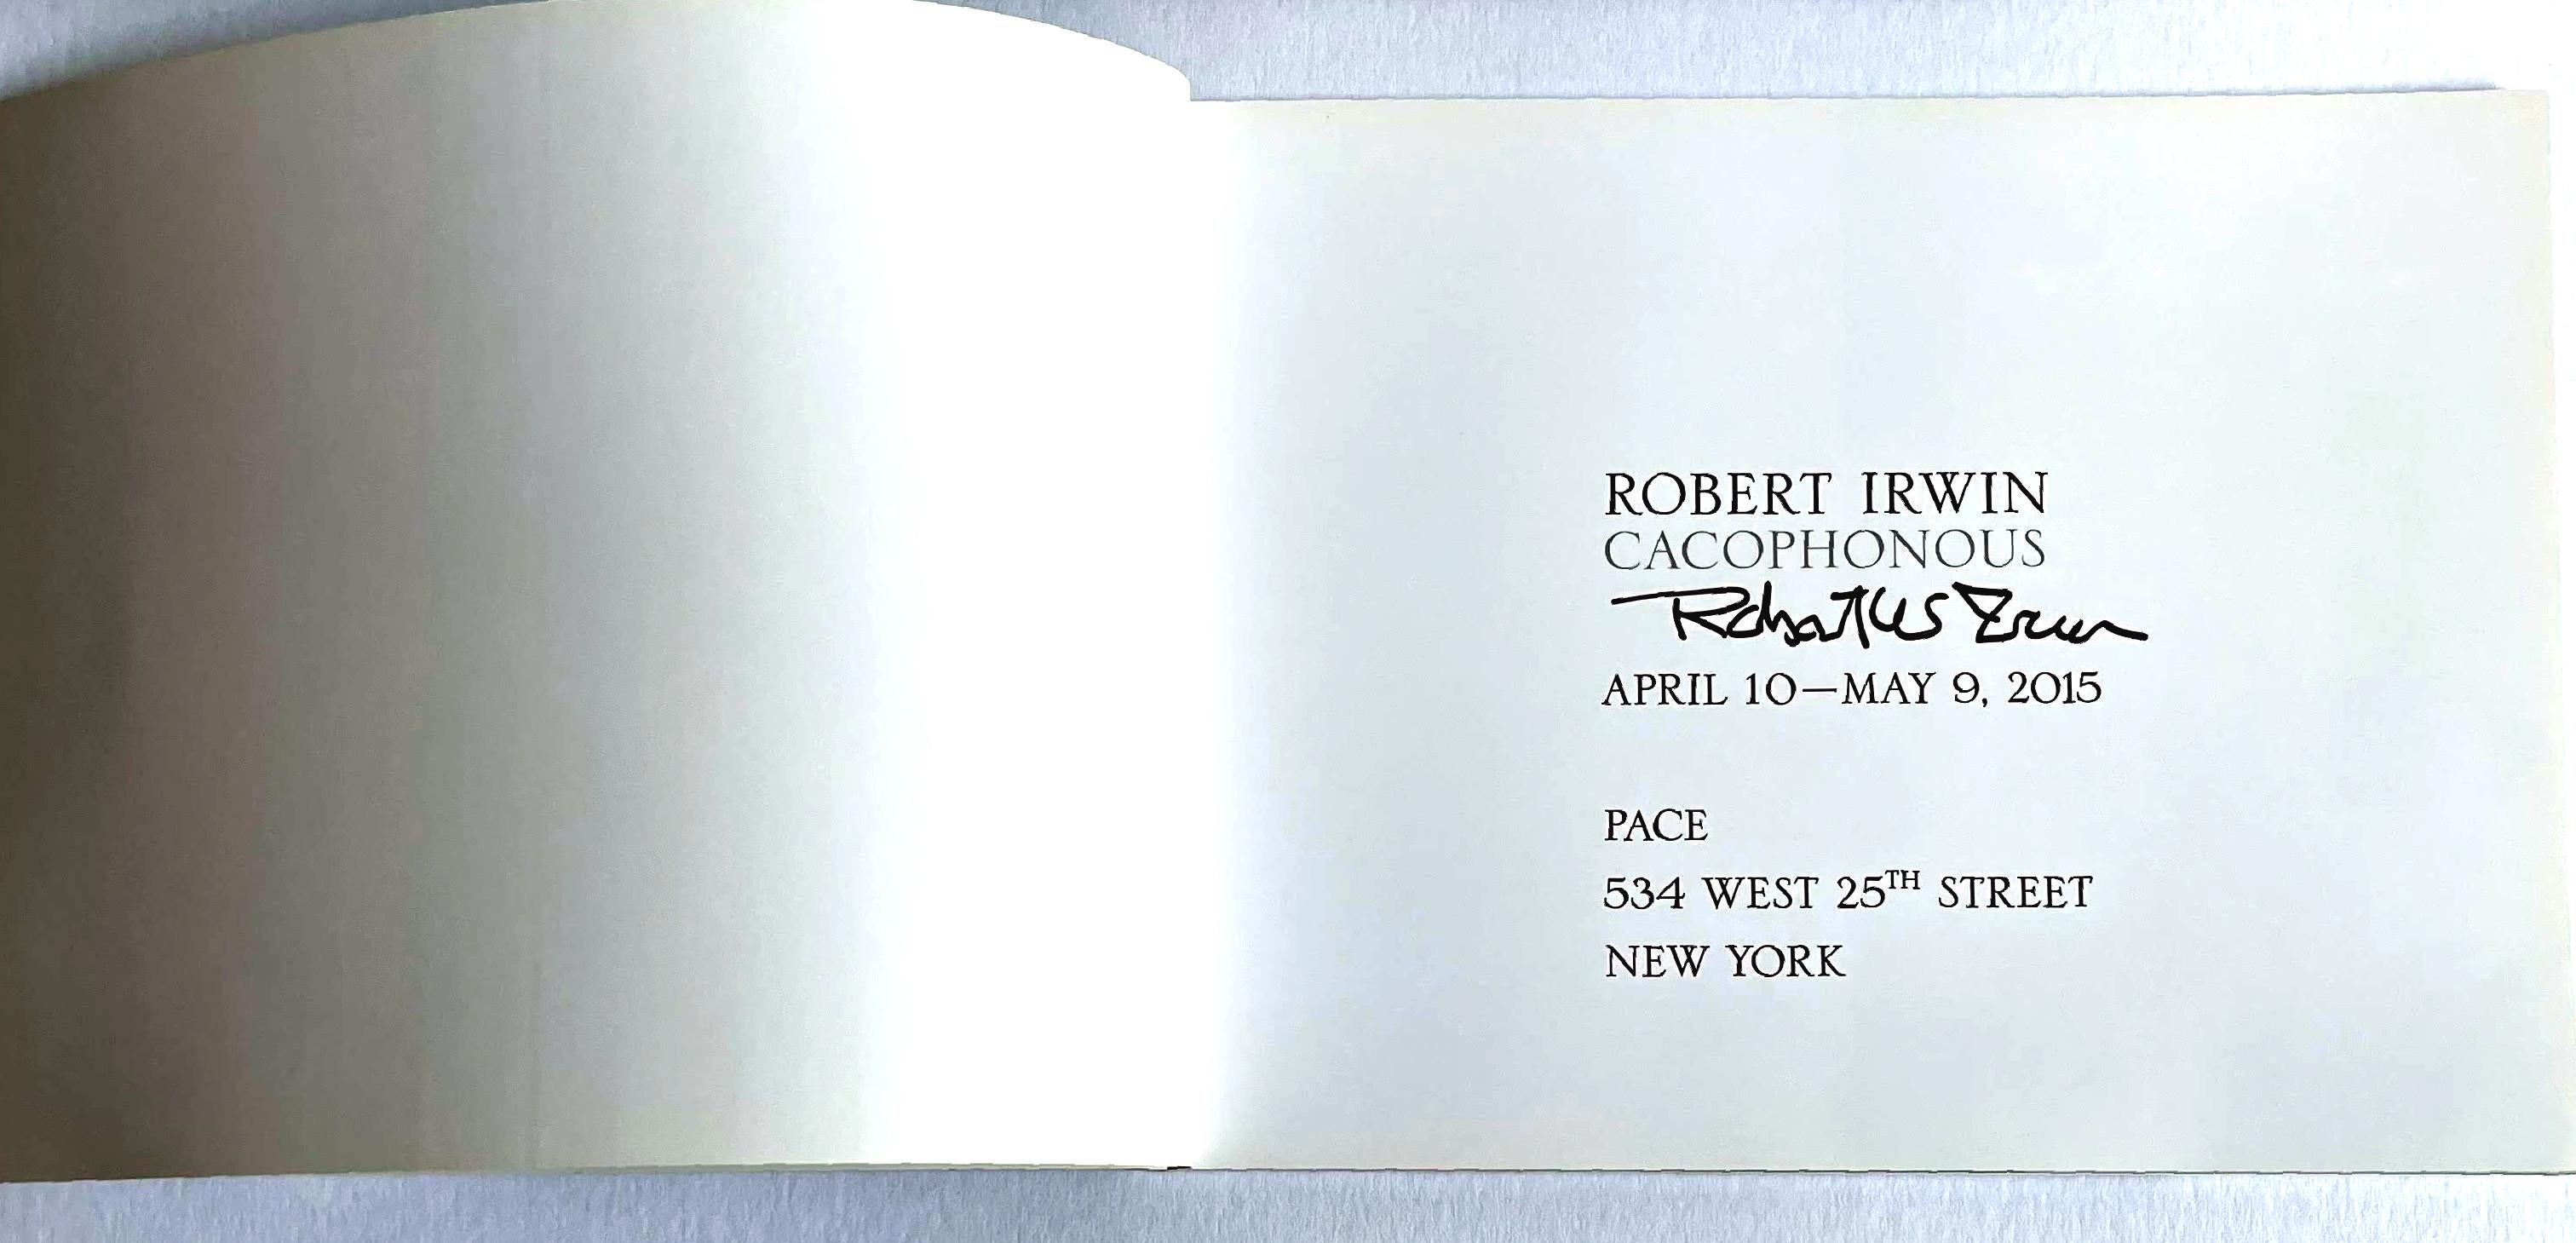 Cacophonous PACE Gallery exhibition catalogue (hand signed by Robert Irwin) For Sale 1